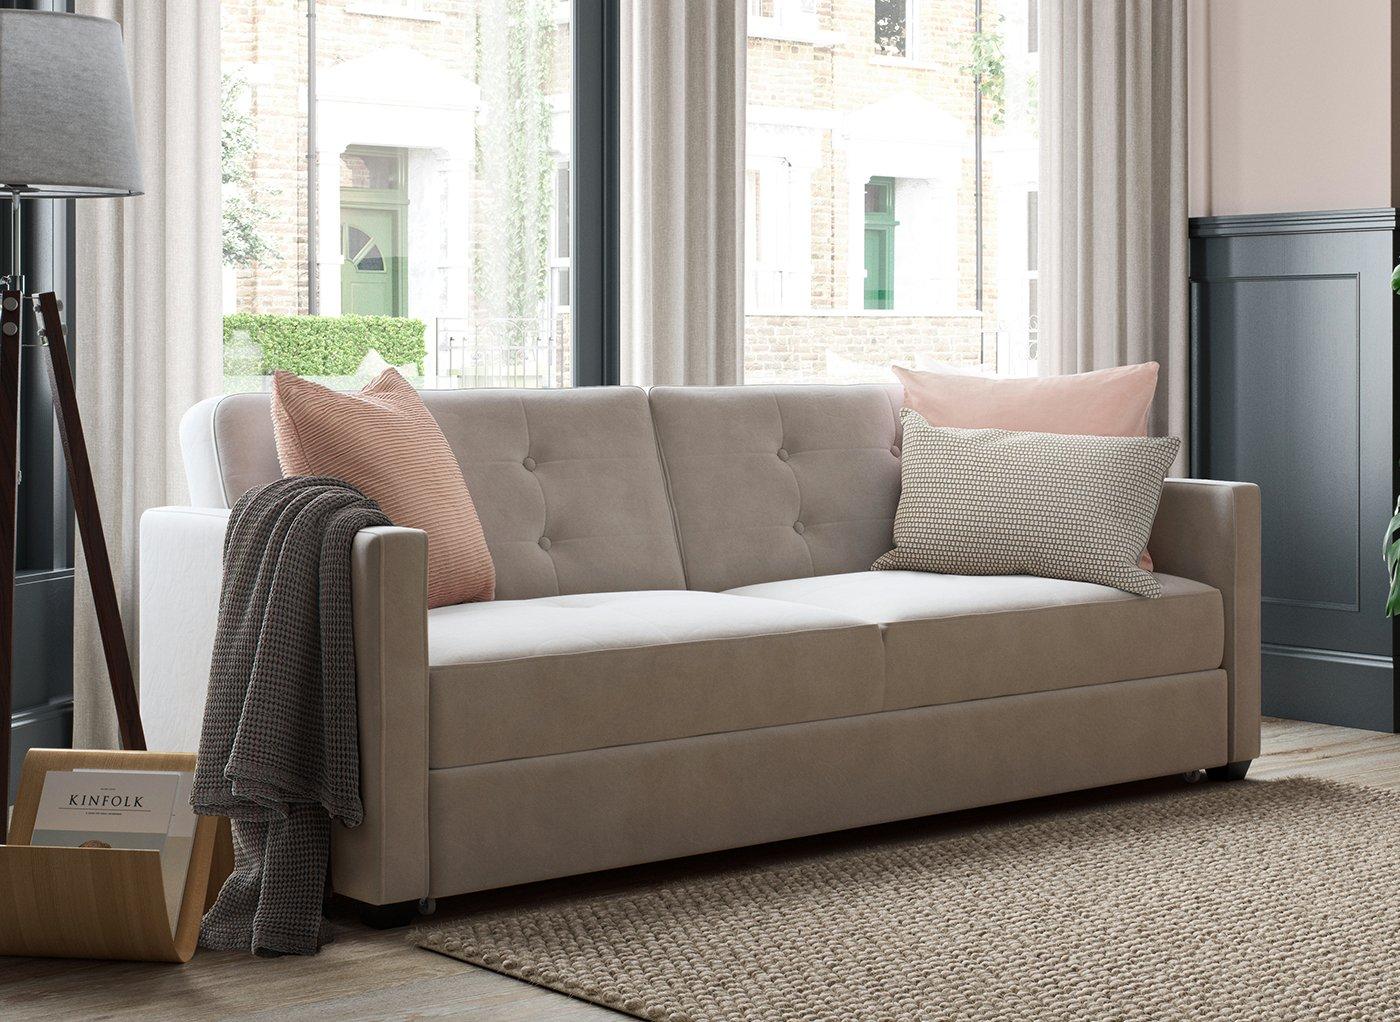 Buy Belfast 3 Seater Clic Clac Sofa Bed Want Mattress